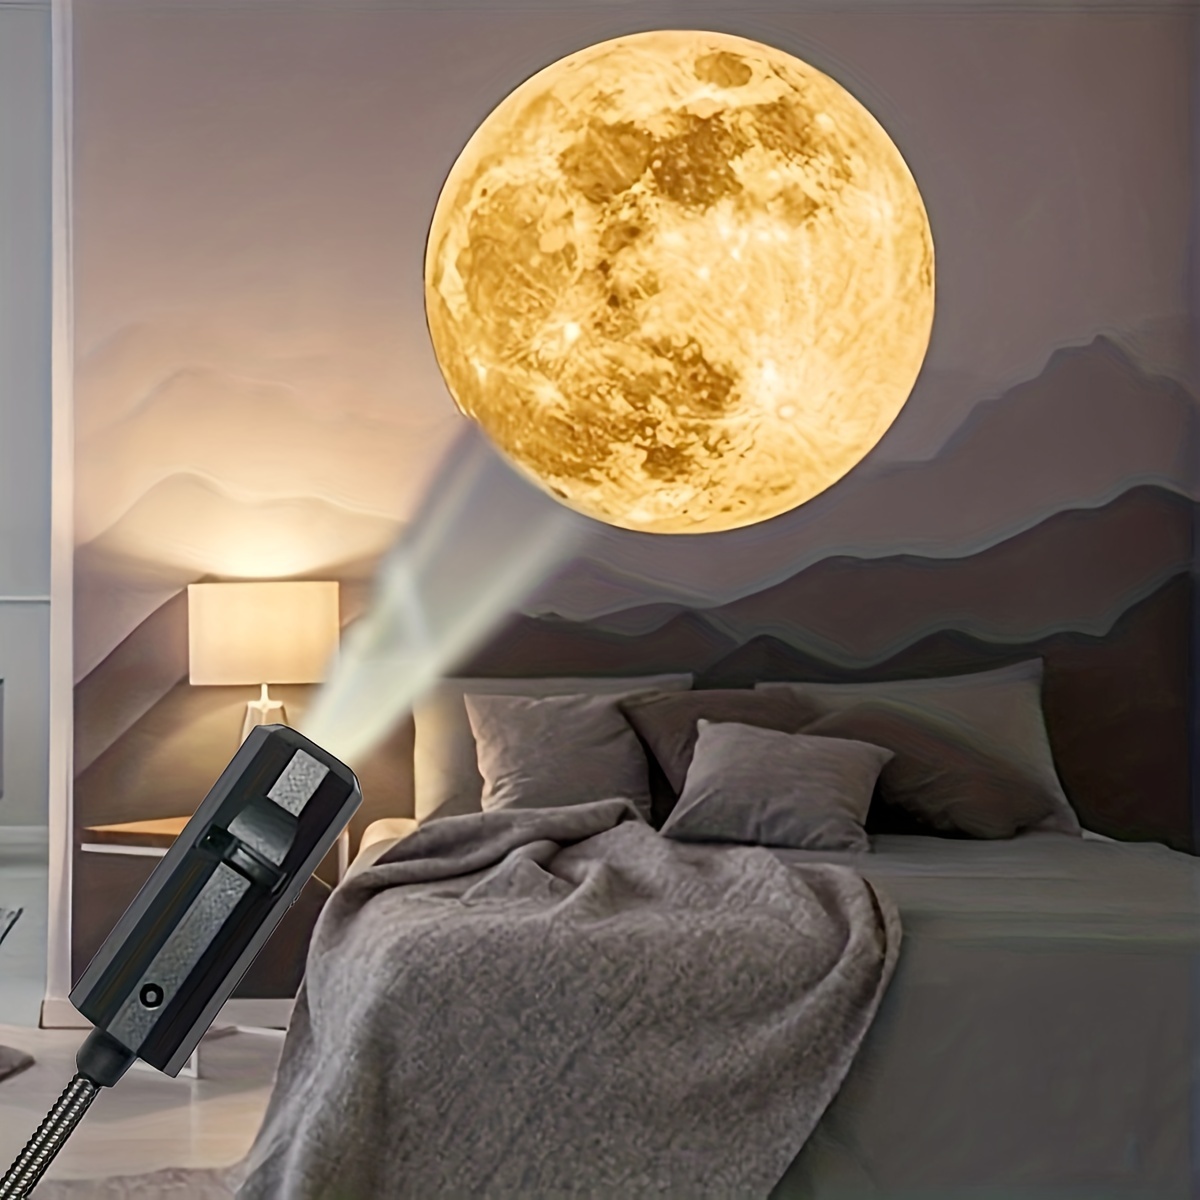 Moon Lamp Projector Night Light,360 Degree Moon Projection Light USB  Powered Lighting,Romantic Moon Atmosphere Projector For Moon Fantasy  Lovers,Coupl